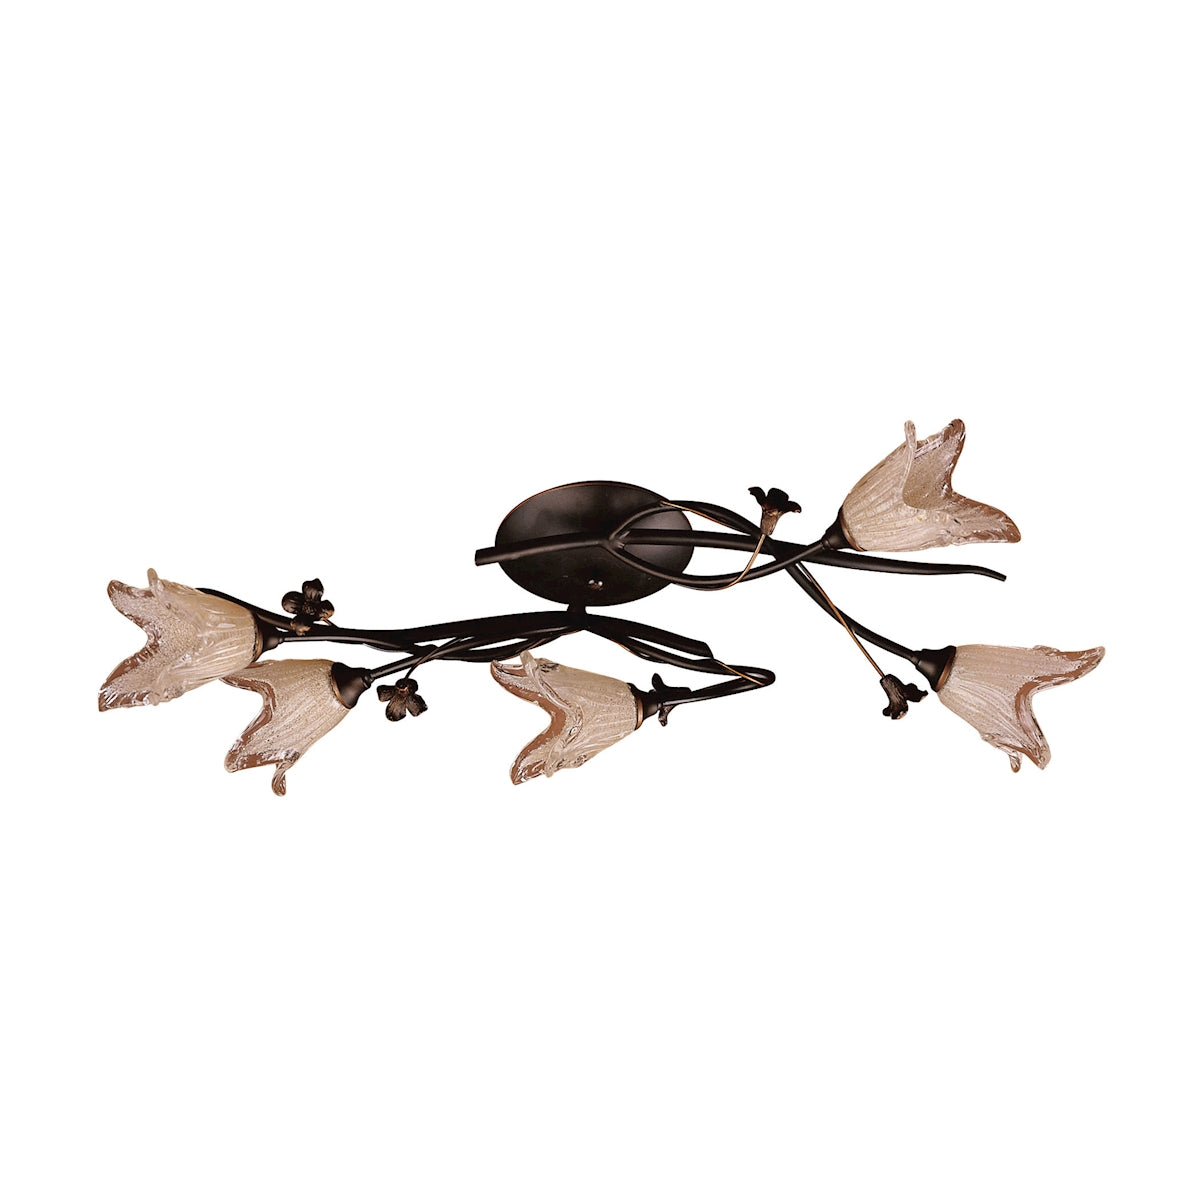 ELK Lighting 7956/5 Fioritura 5-Light Flush Mount in Aged Bronze with Floral-shaped Glass